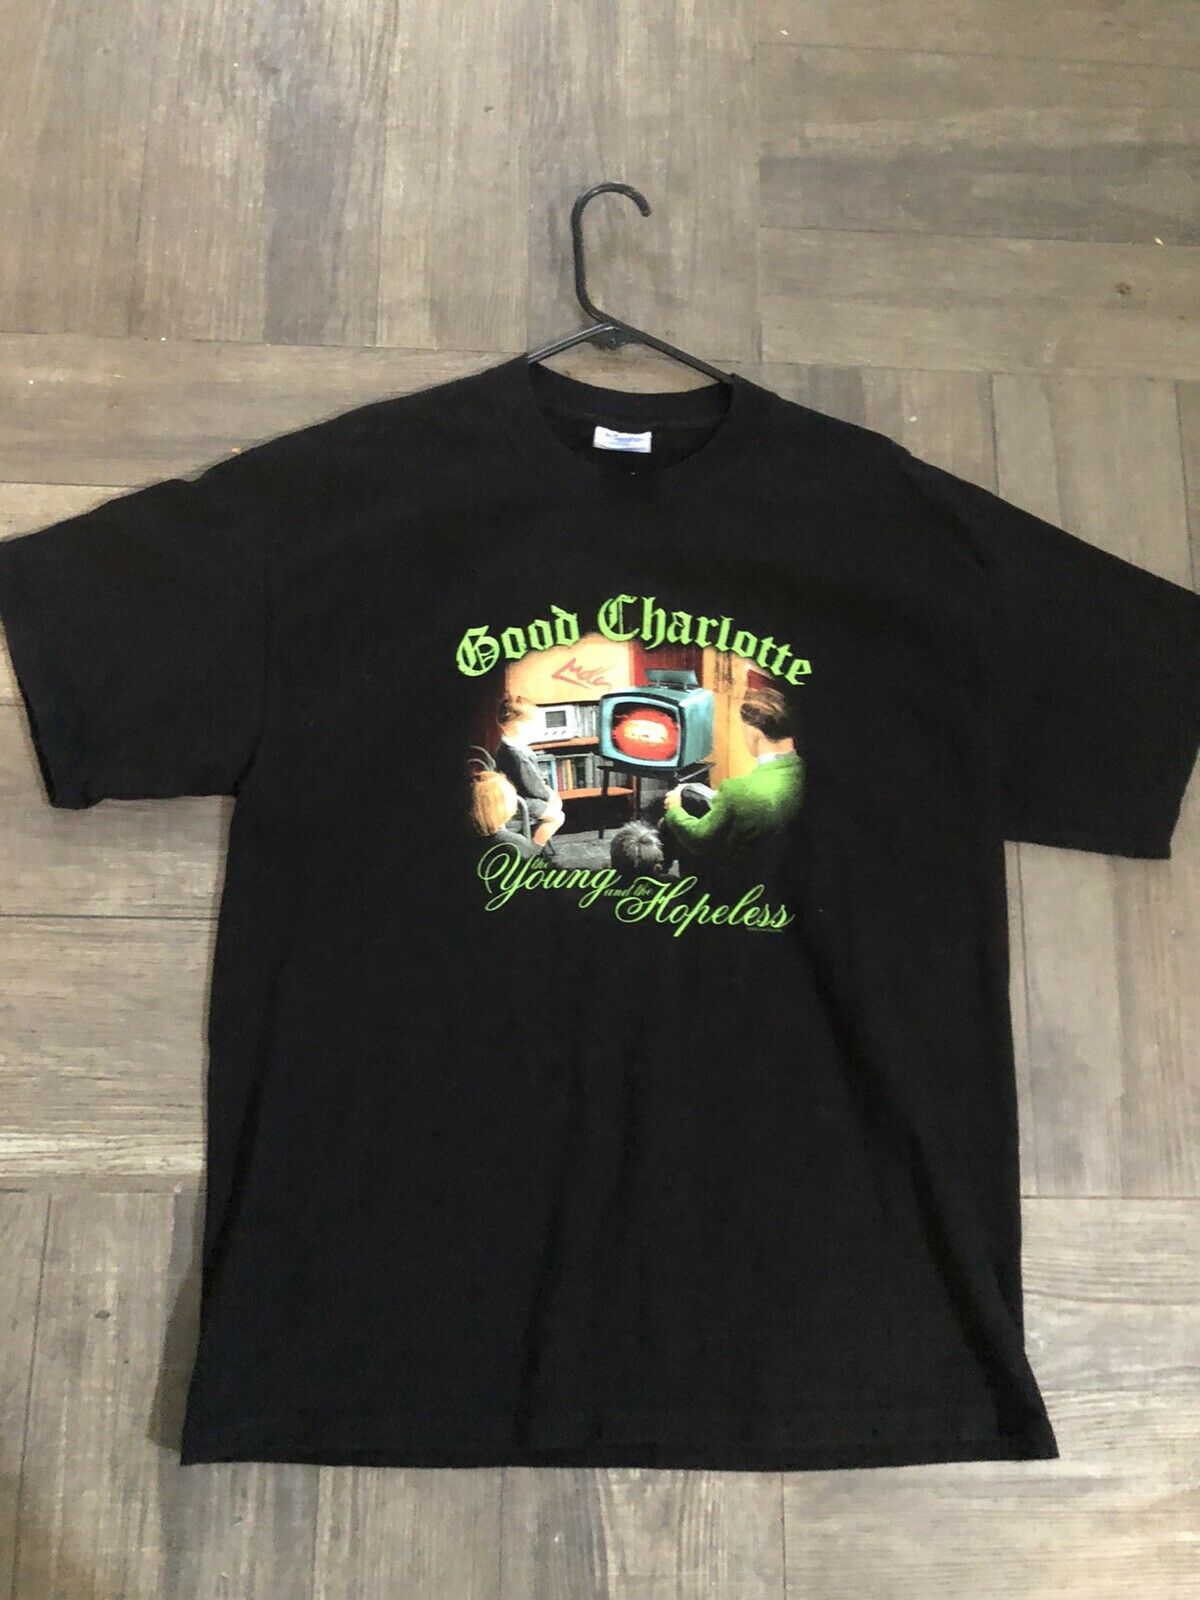 Good Charlotte Tshirt “Young and The Hopless 2002 new Size L black